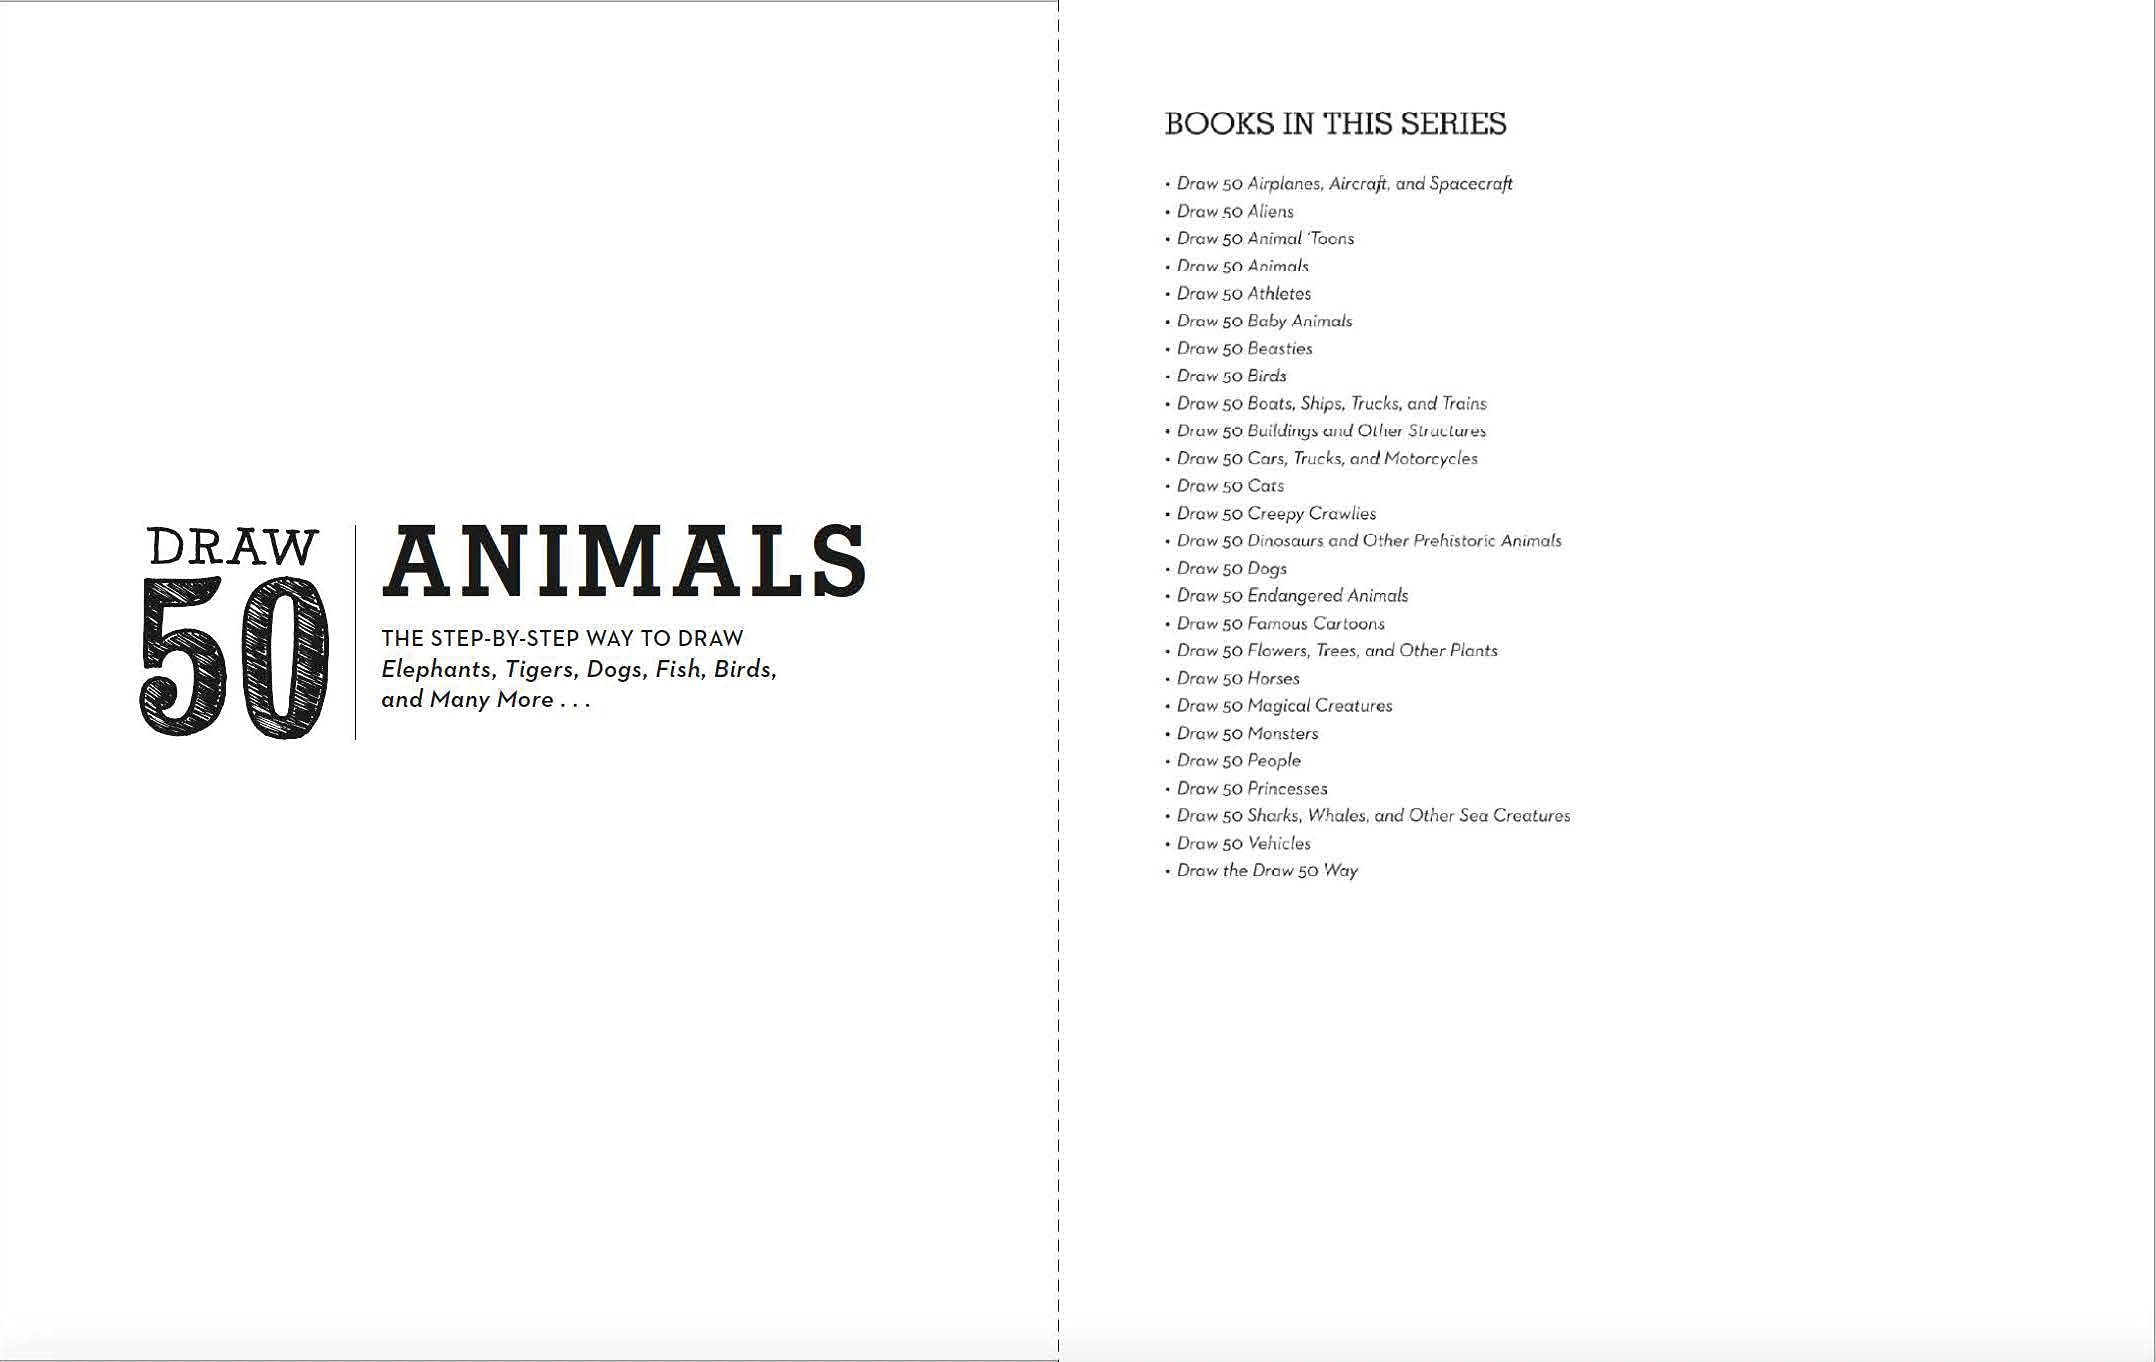 Draw 50 Animals: The Step-by-Step Way to Draw Elephants, Tigers, Dogs, Fish, Birds, and Many More...